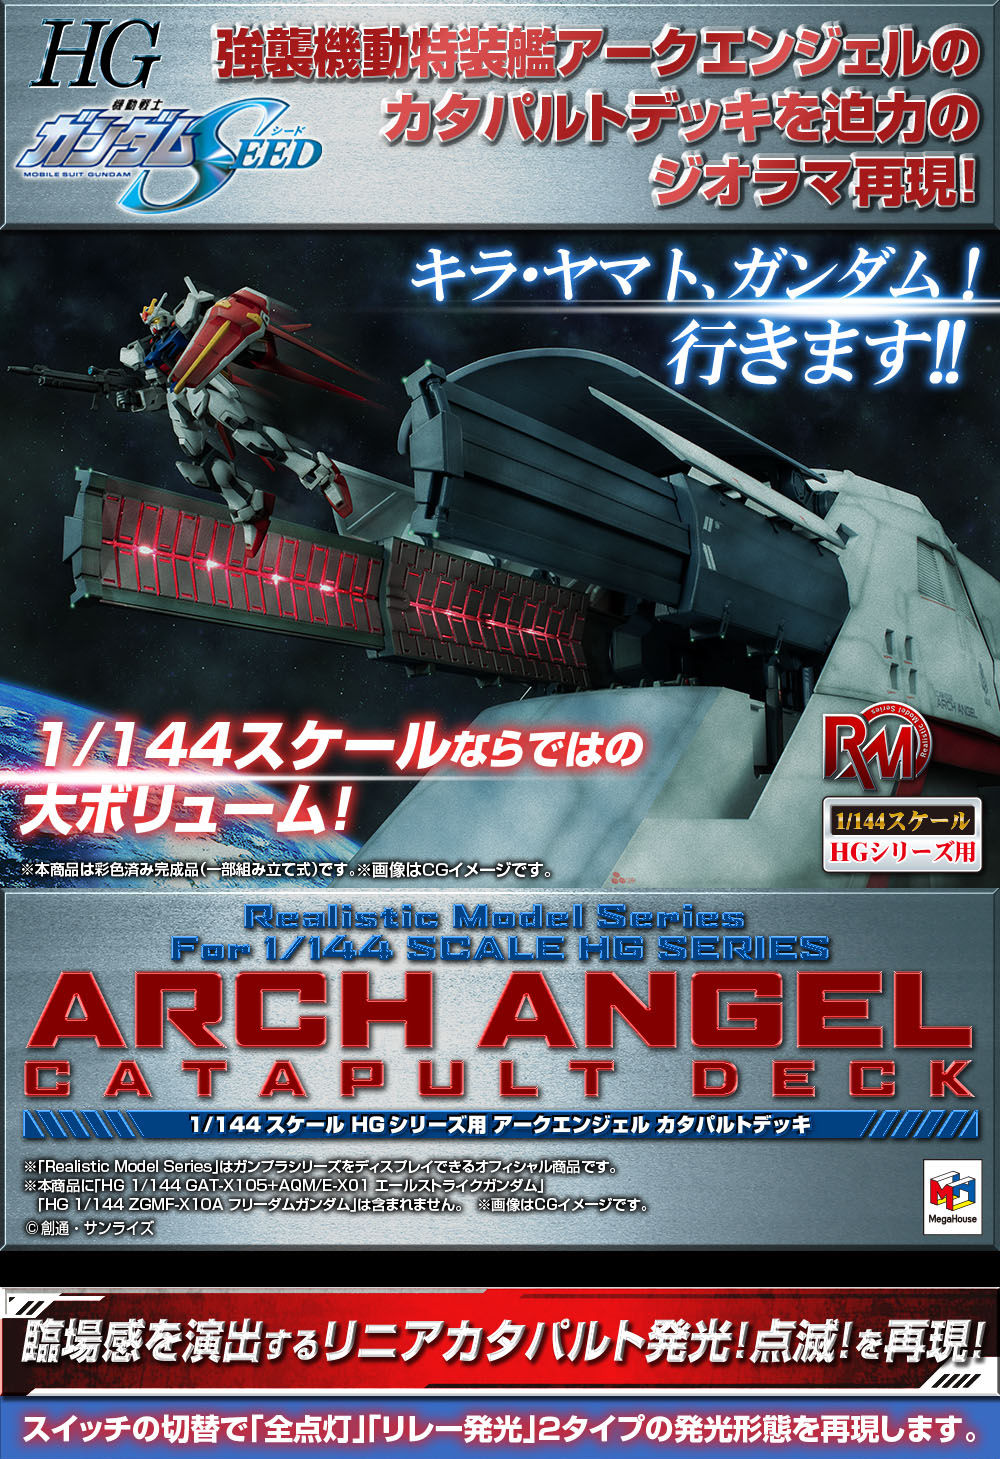 RMS for 1/144 Scale HG Series:LCAM-01XA Arch Angel Catapult Deck